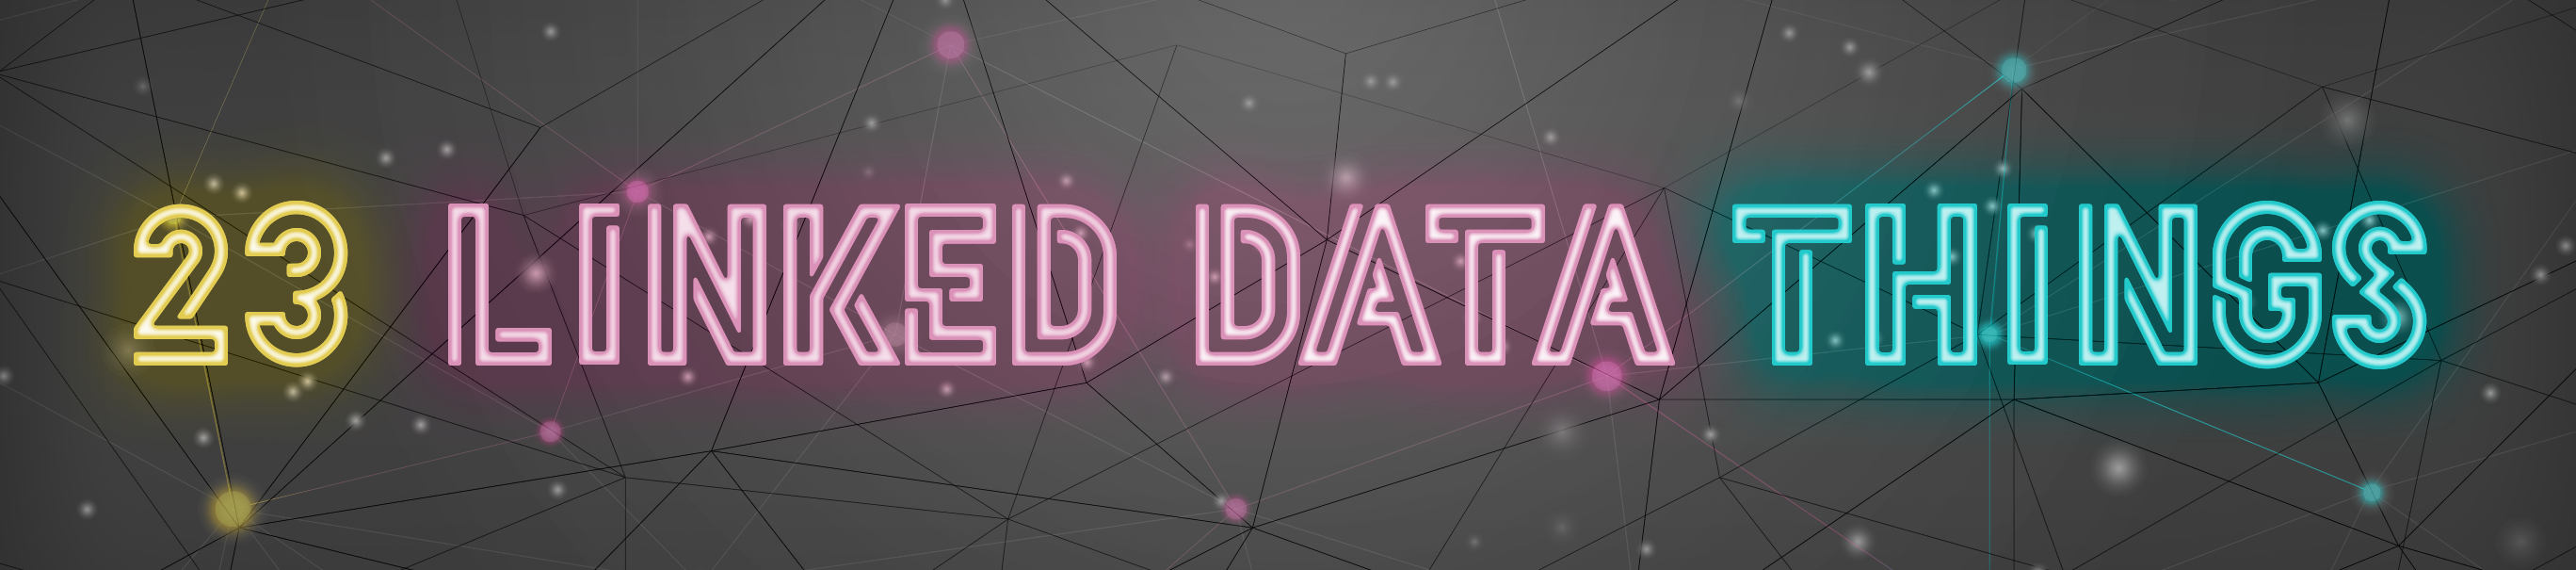 The logo for 23 Linked Data Things, written in a yellow, pink, and blue neon font.